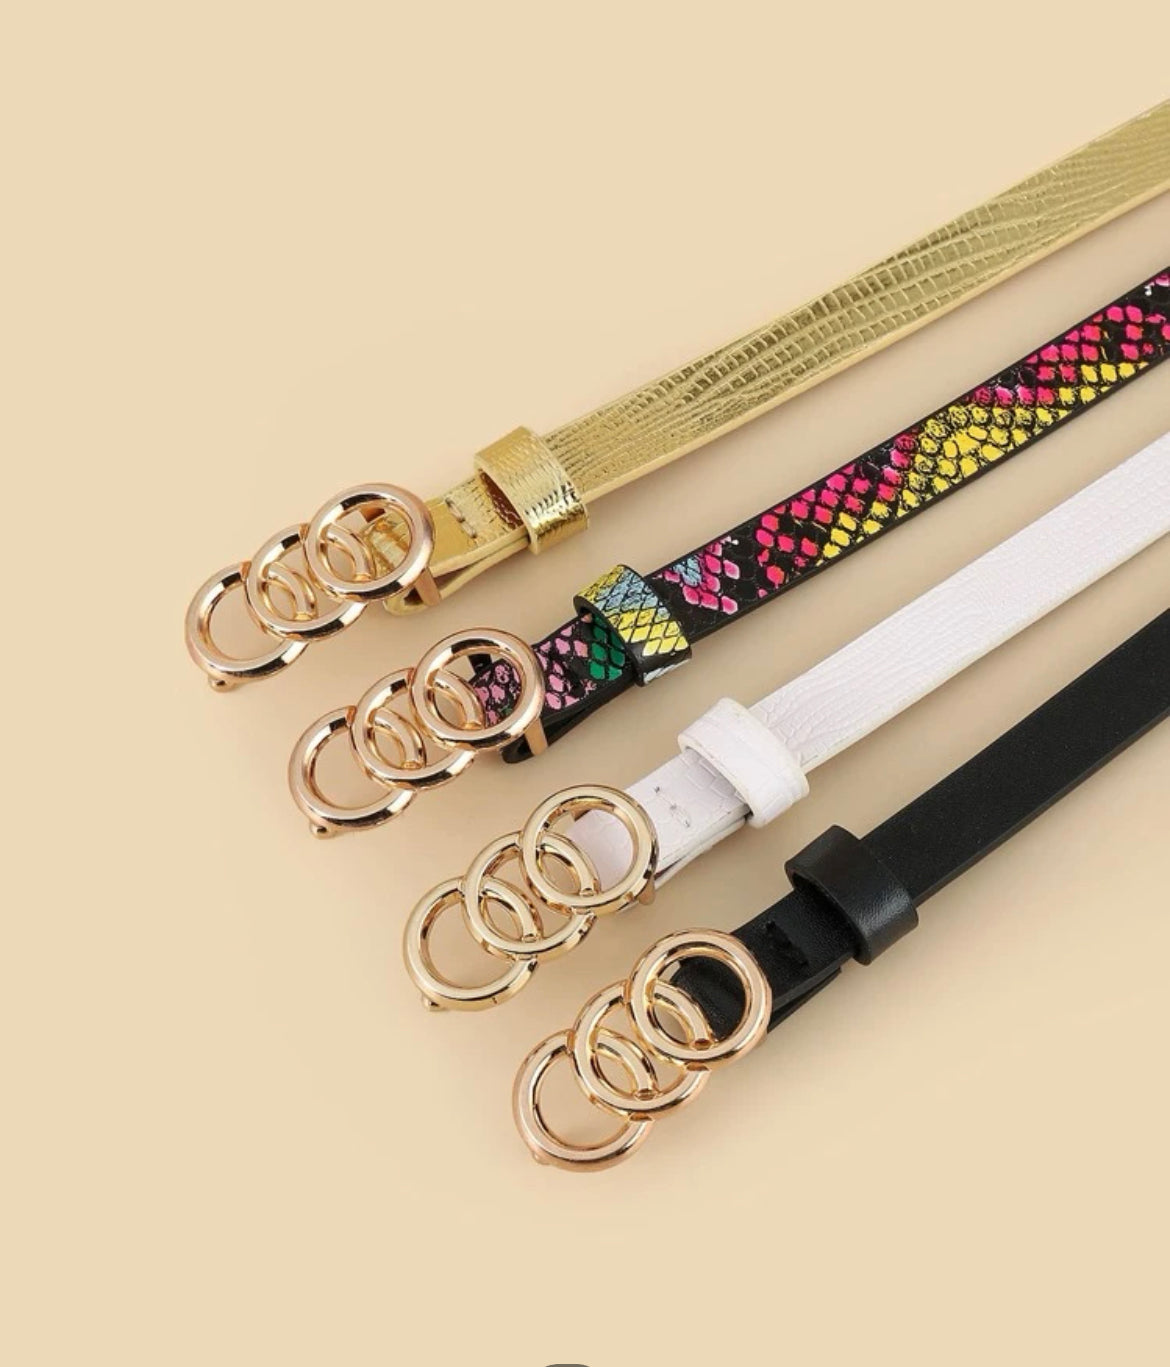 four Triple Circle Buckle Belt with Punch Tool Leather Belts in white, gold, snake skin, black